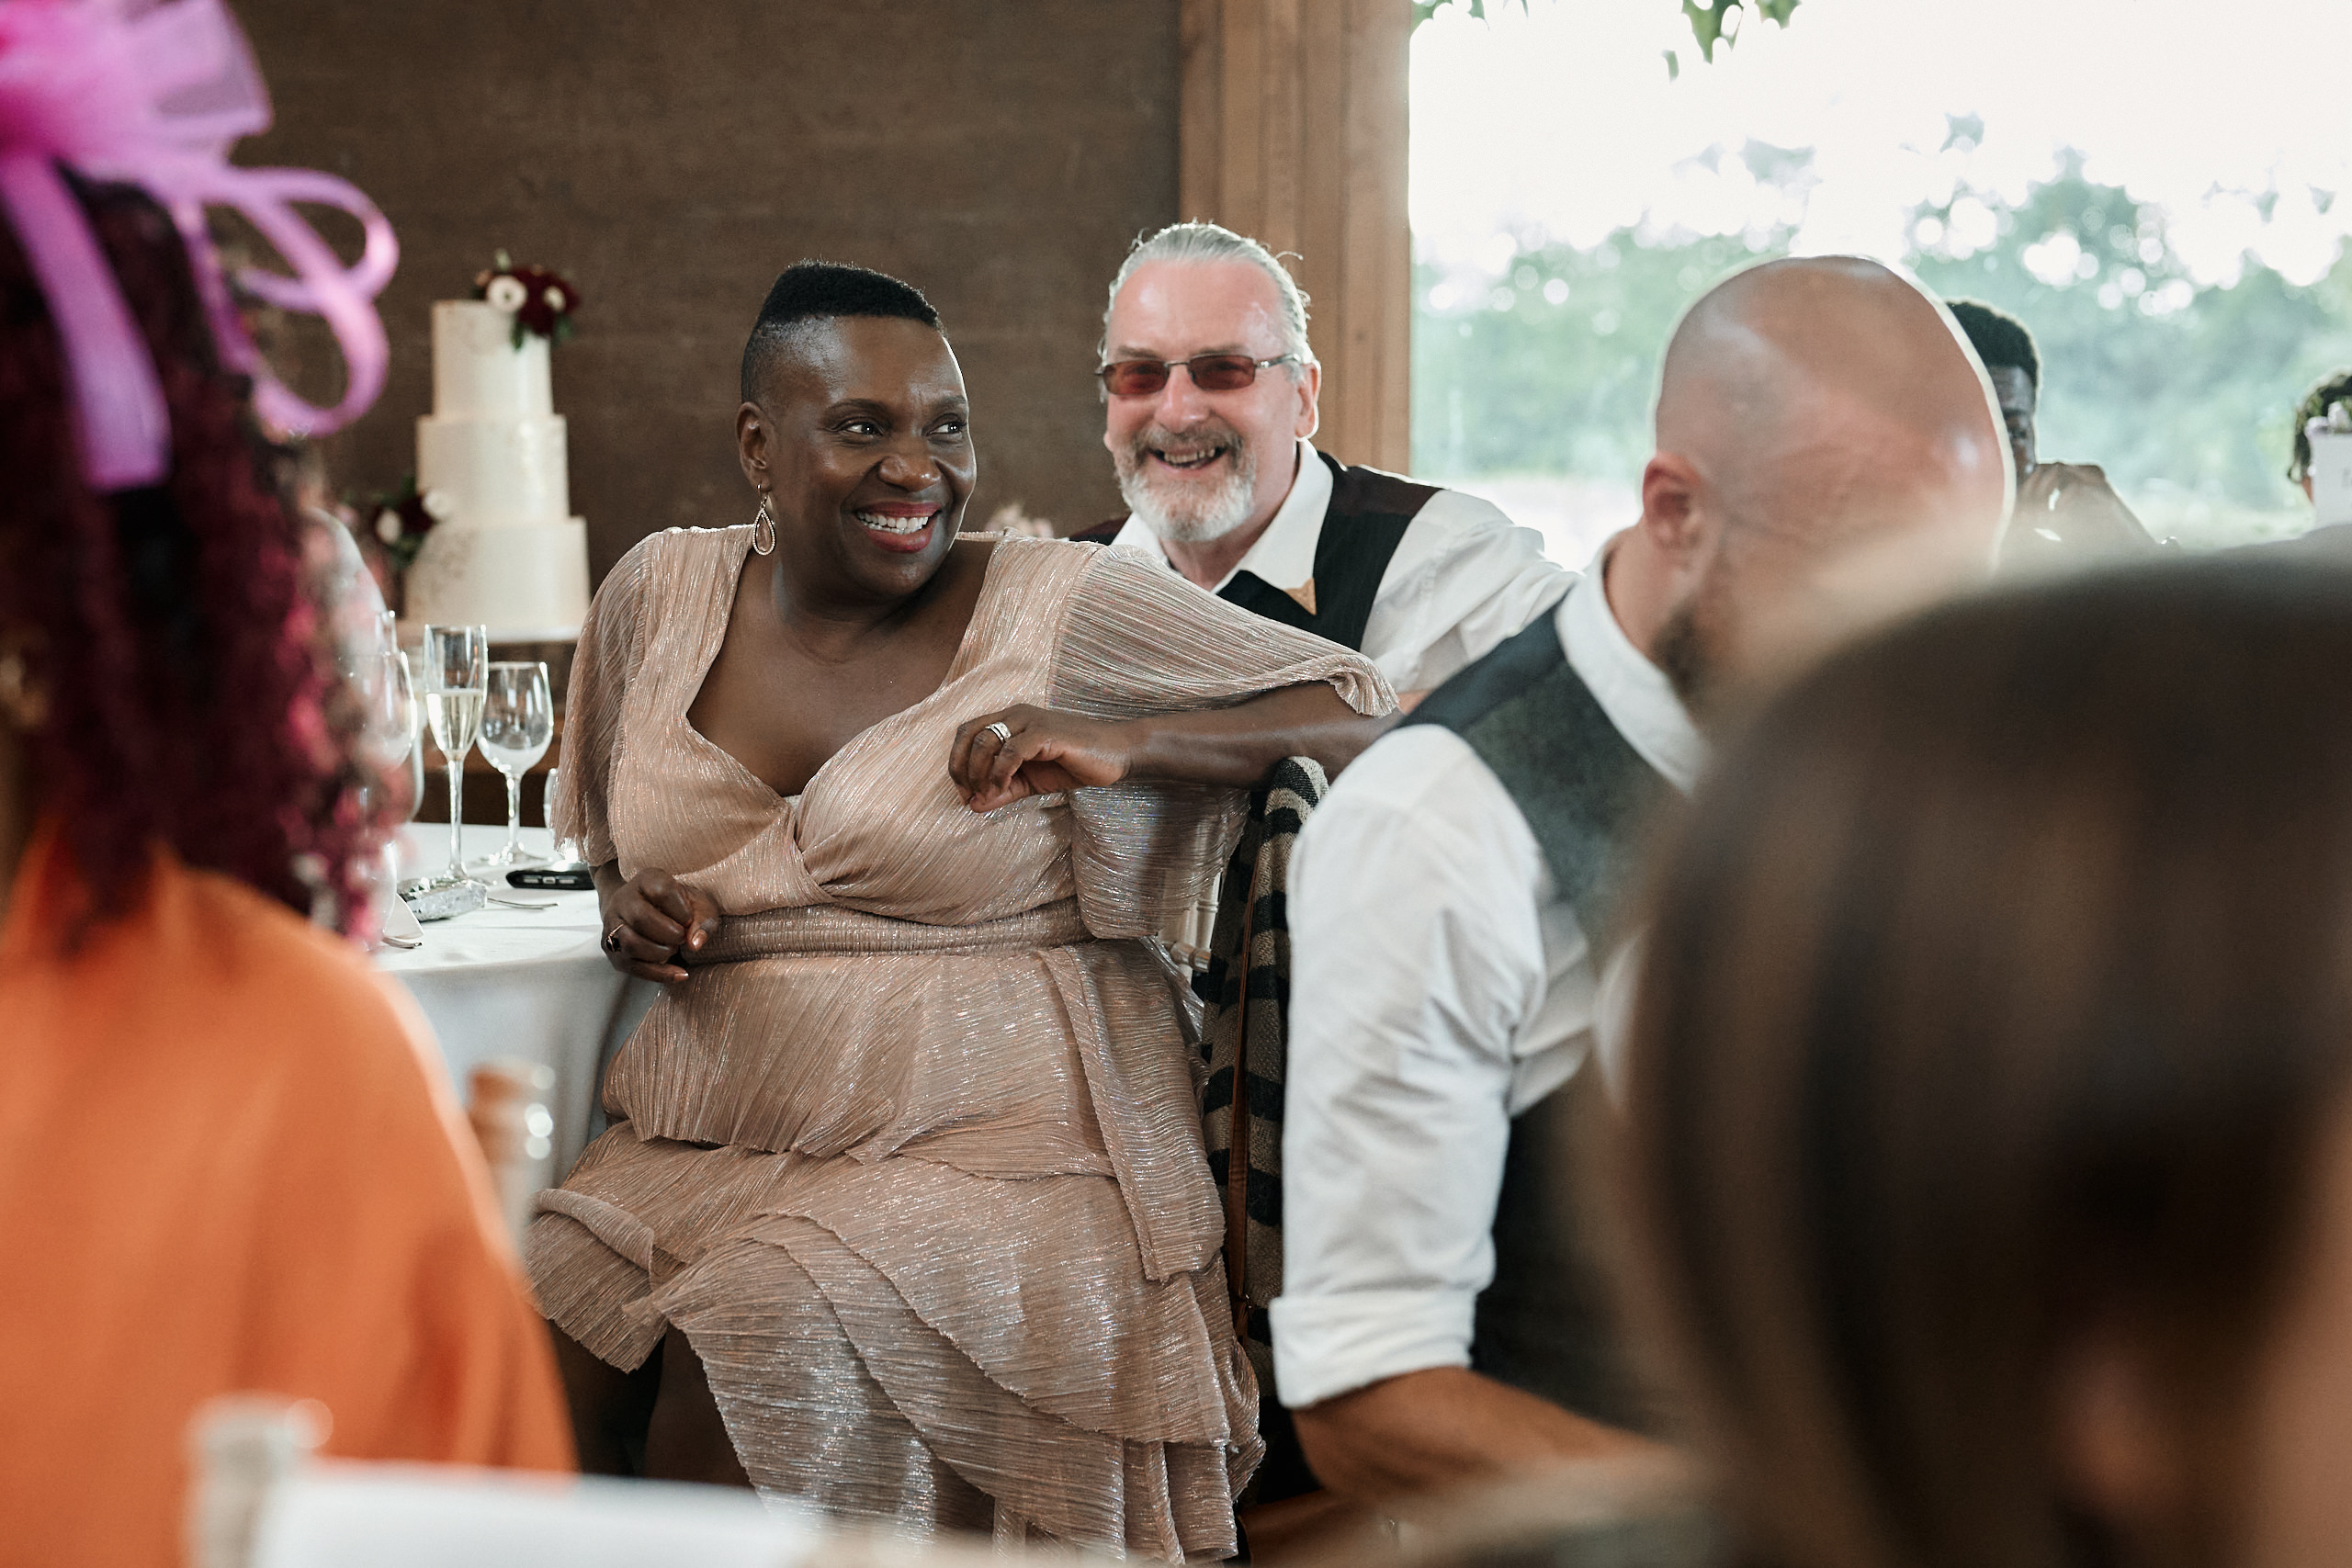 A lady is cracking up as she sits at a table during a wedding.